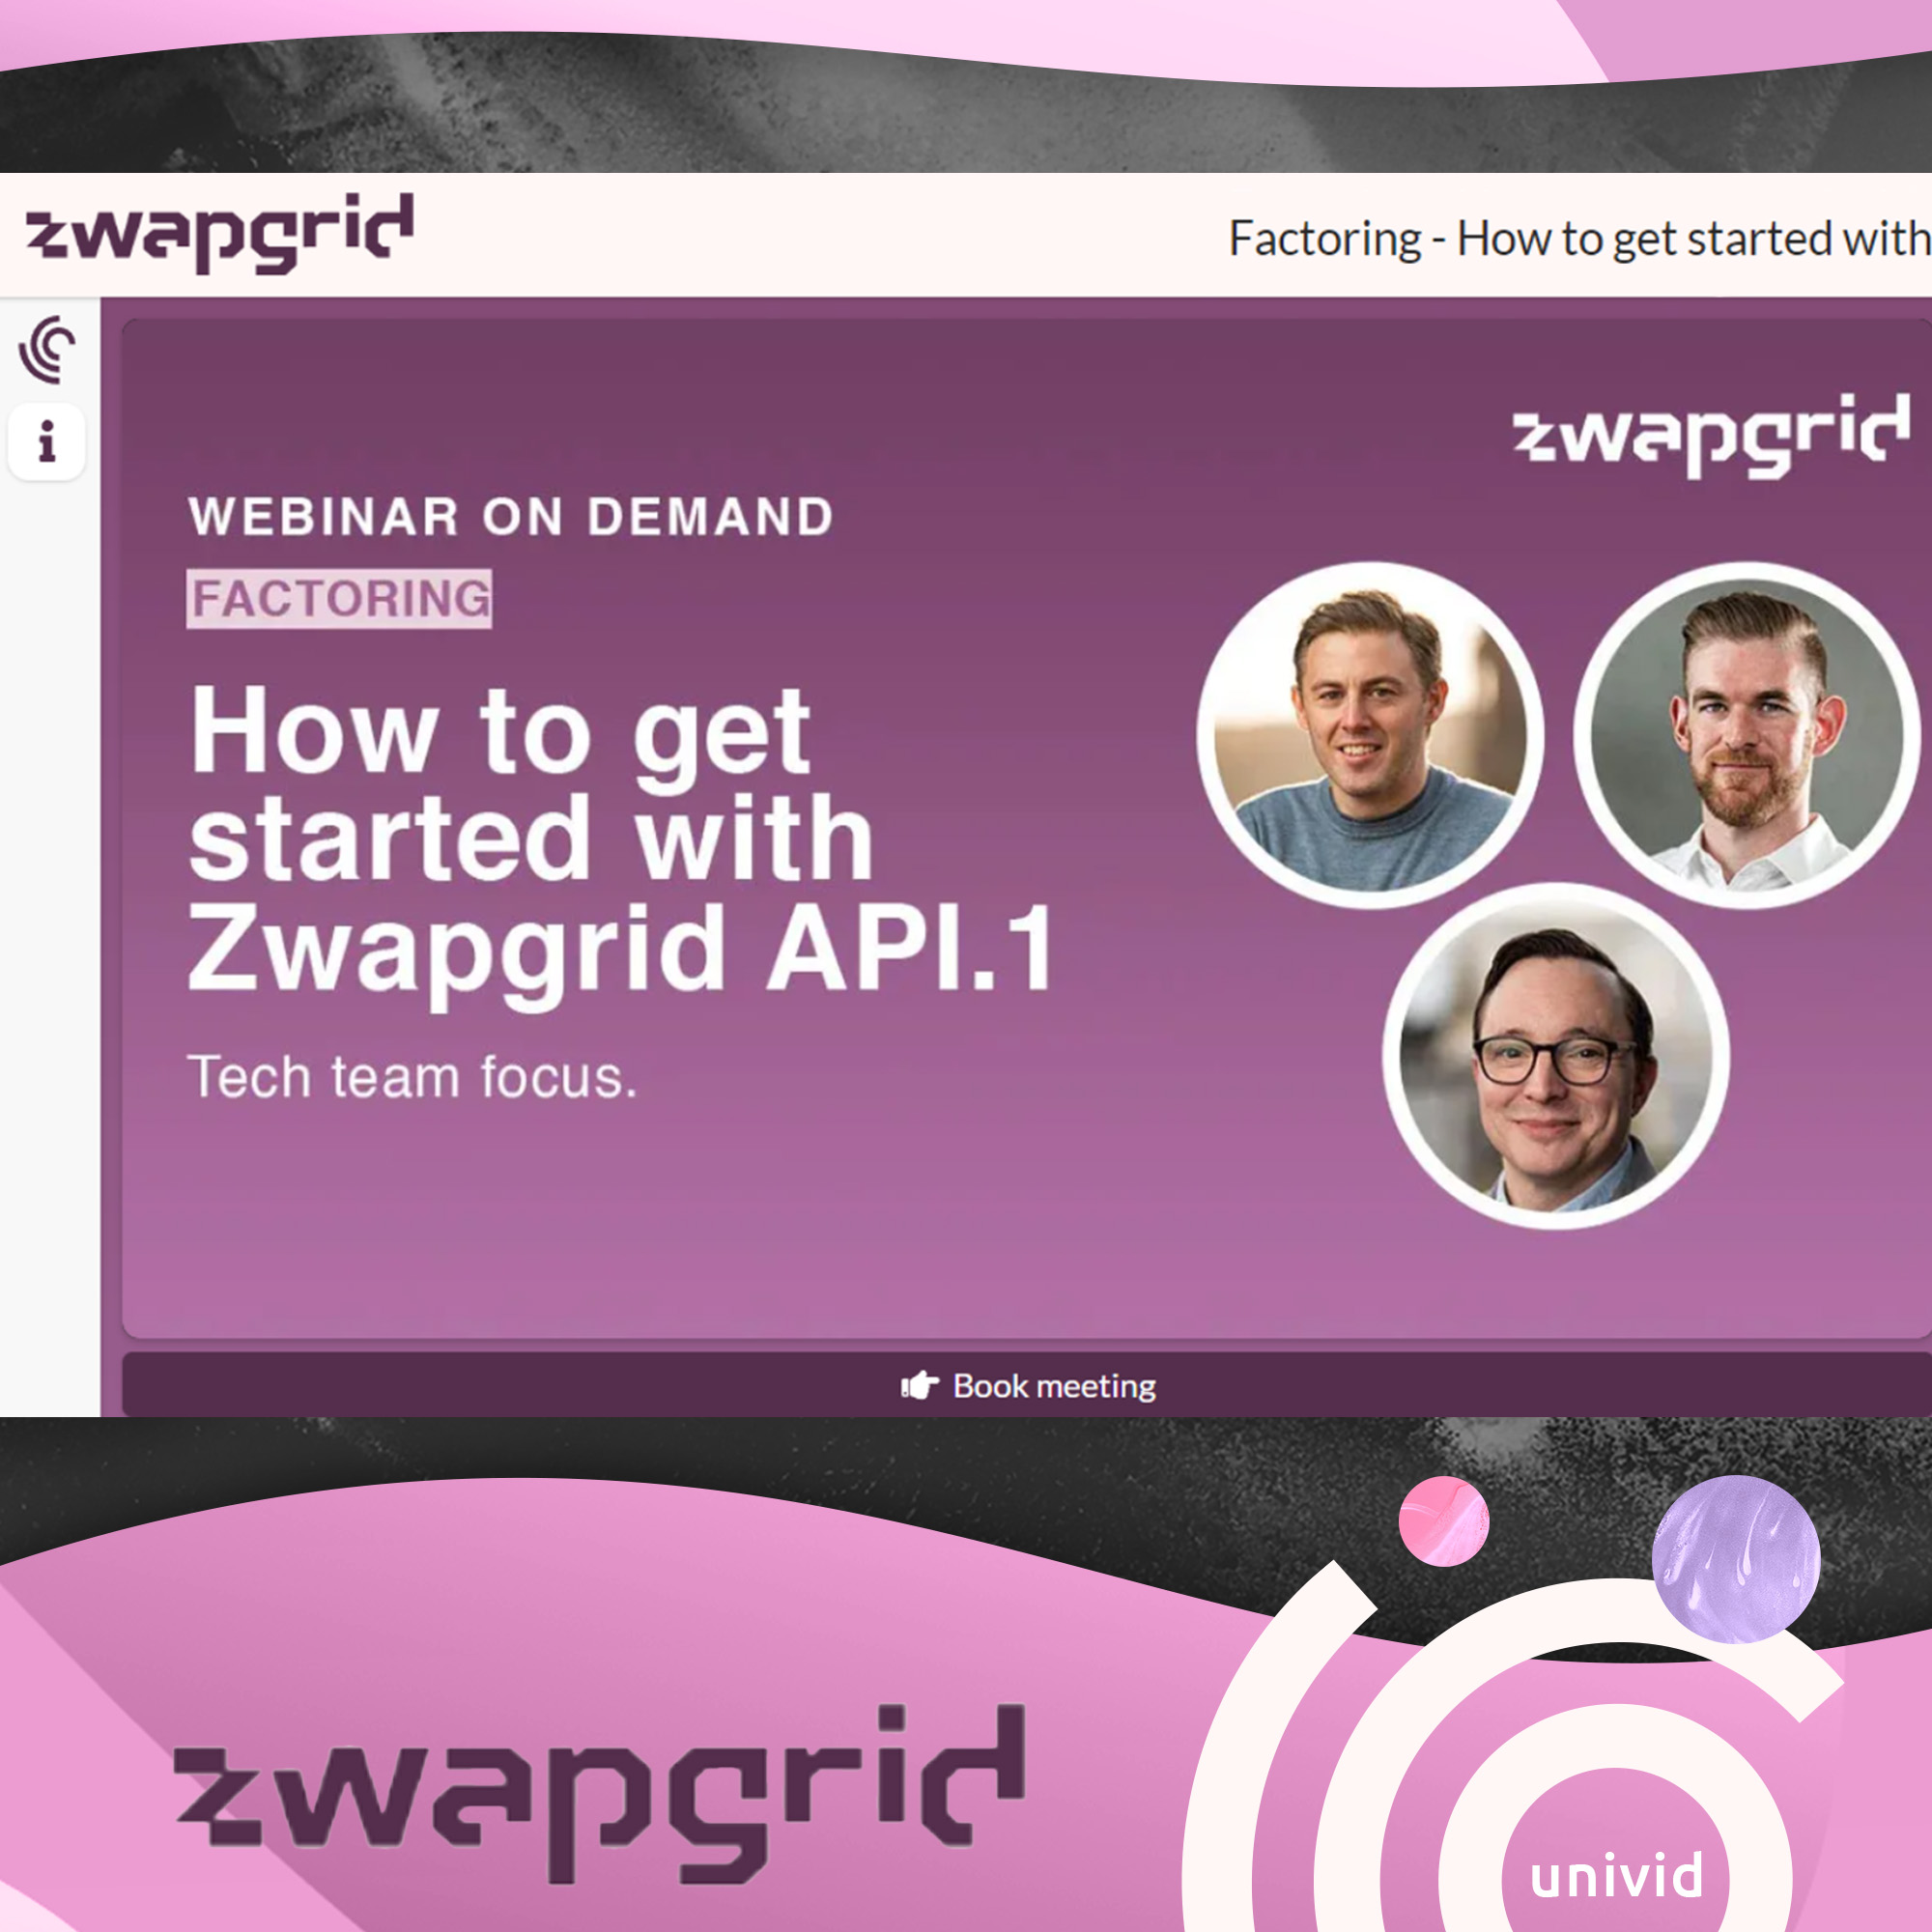 <a target='_blank' rel='noopener noreferrer' href='https://zwapgrid.com/'>Zwapgrid</a> are using Univid to host laser focused webinars on the future of financial data. Zwapgrid is a Swedish finance company that helps integrate and share financial data between different systems. With a Q&A, CTA-button to book meetings, and up to 5 panelists - Zwapgrid:s webinars are heavily packed with niche insights for exactly the right audience.